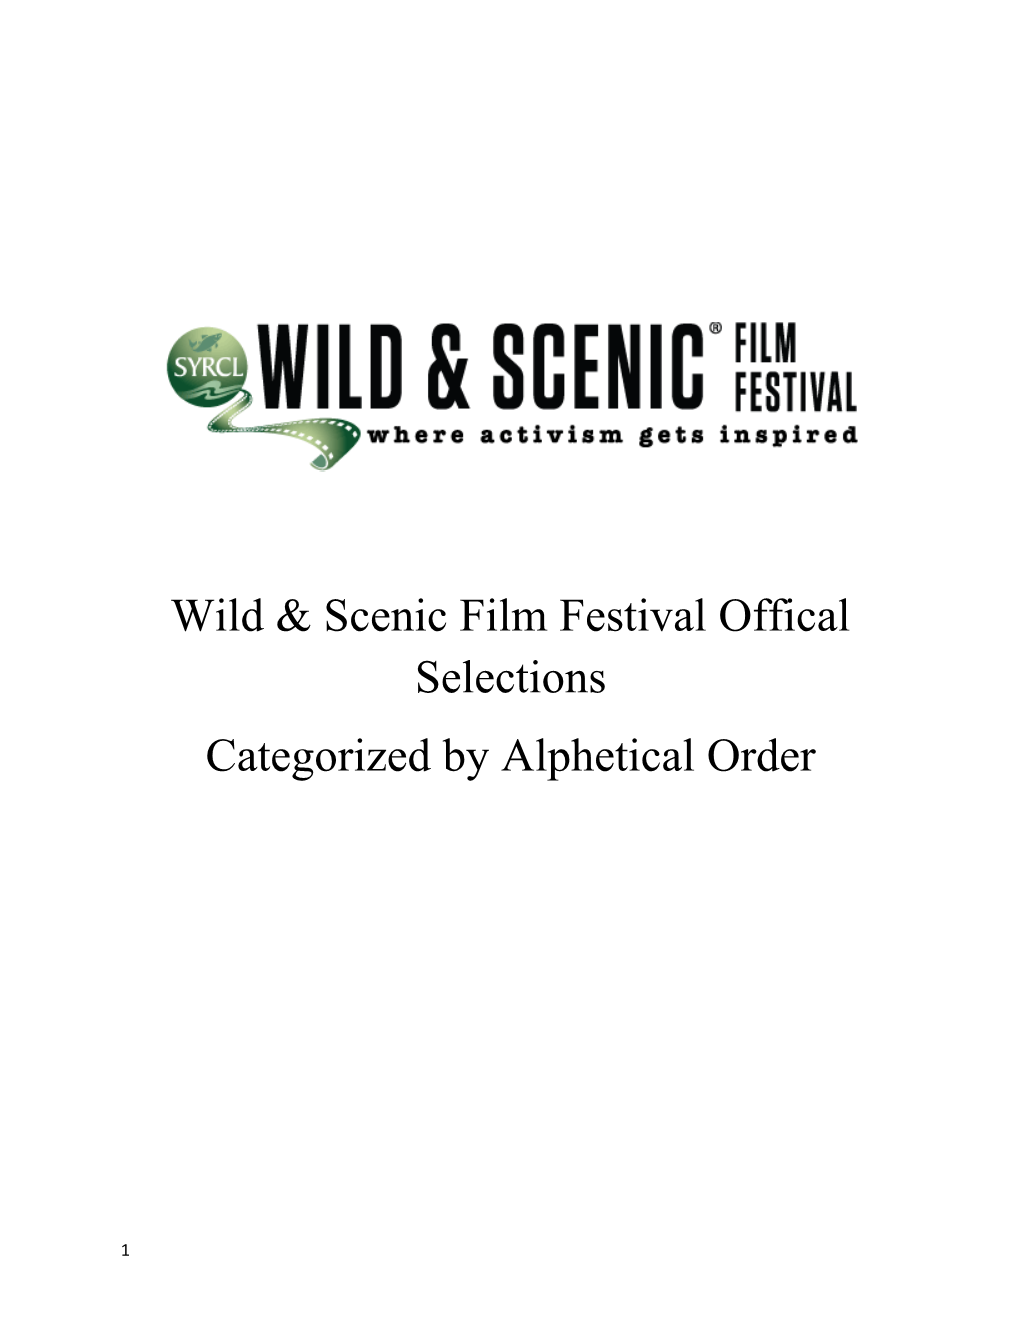 Wild & Scenic Film Festival Offical Selections